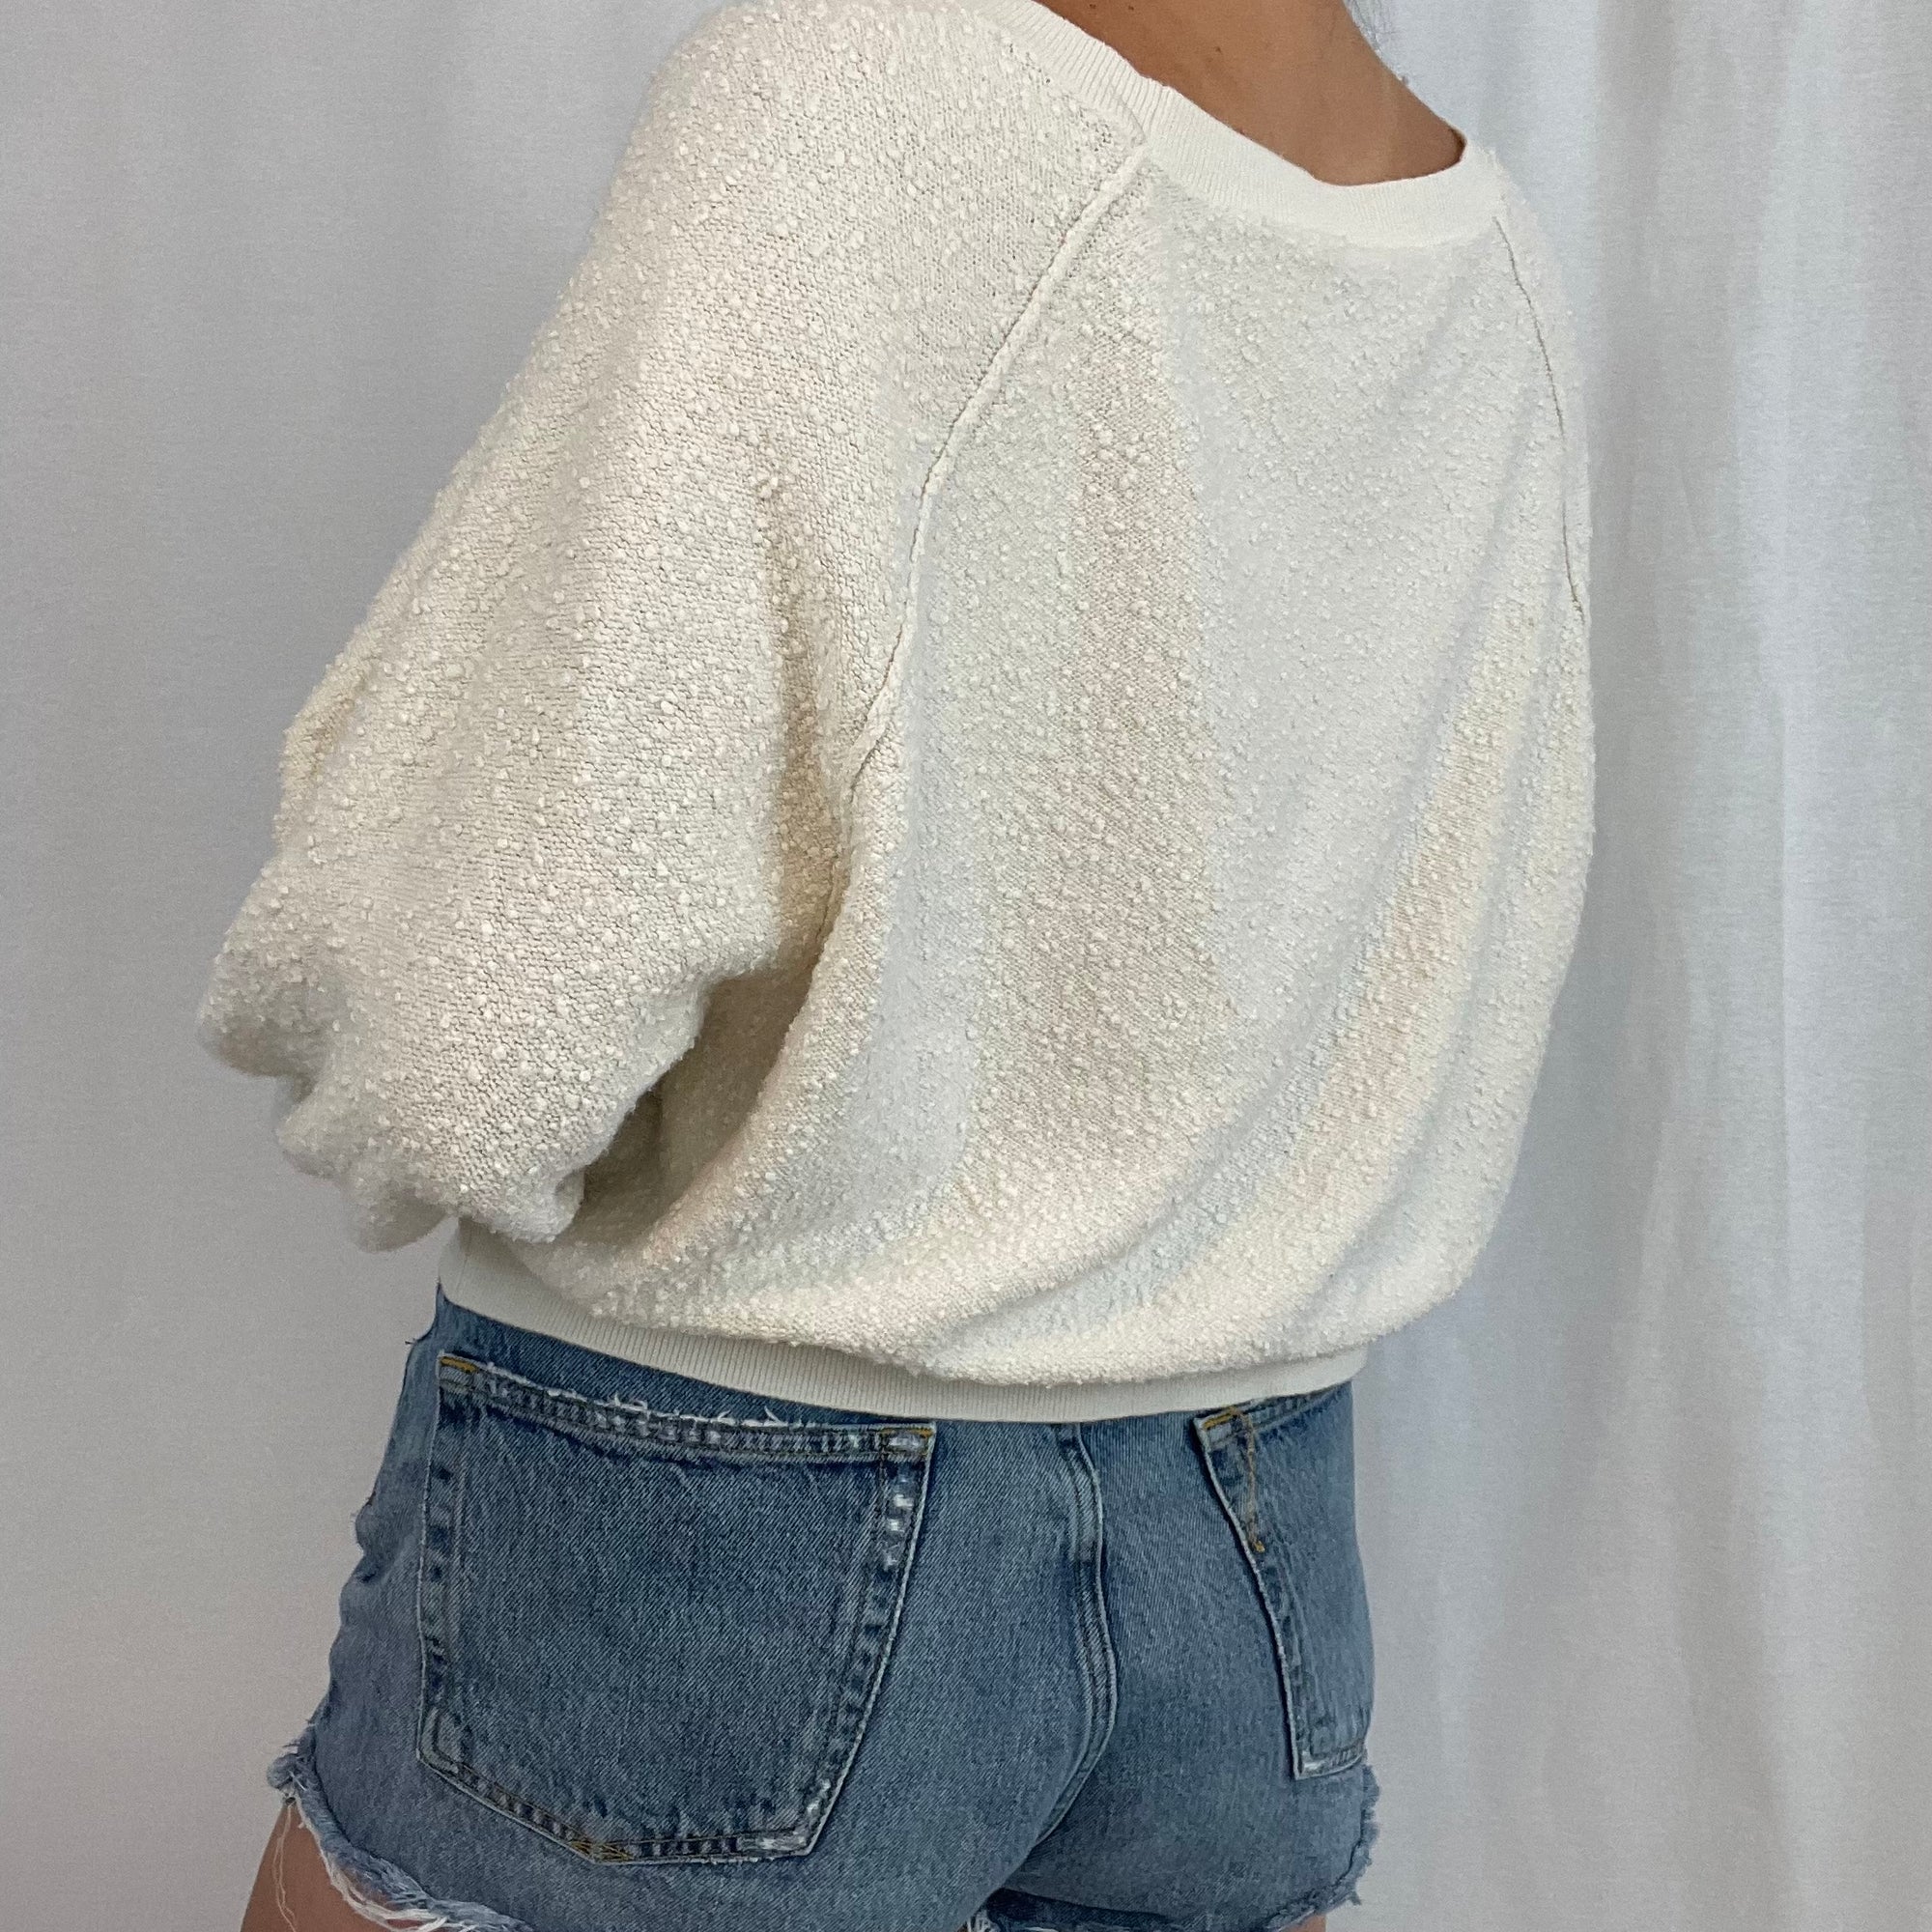 Free People Cropped Cream Knit Sweater size Small